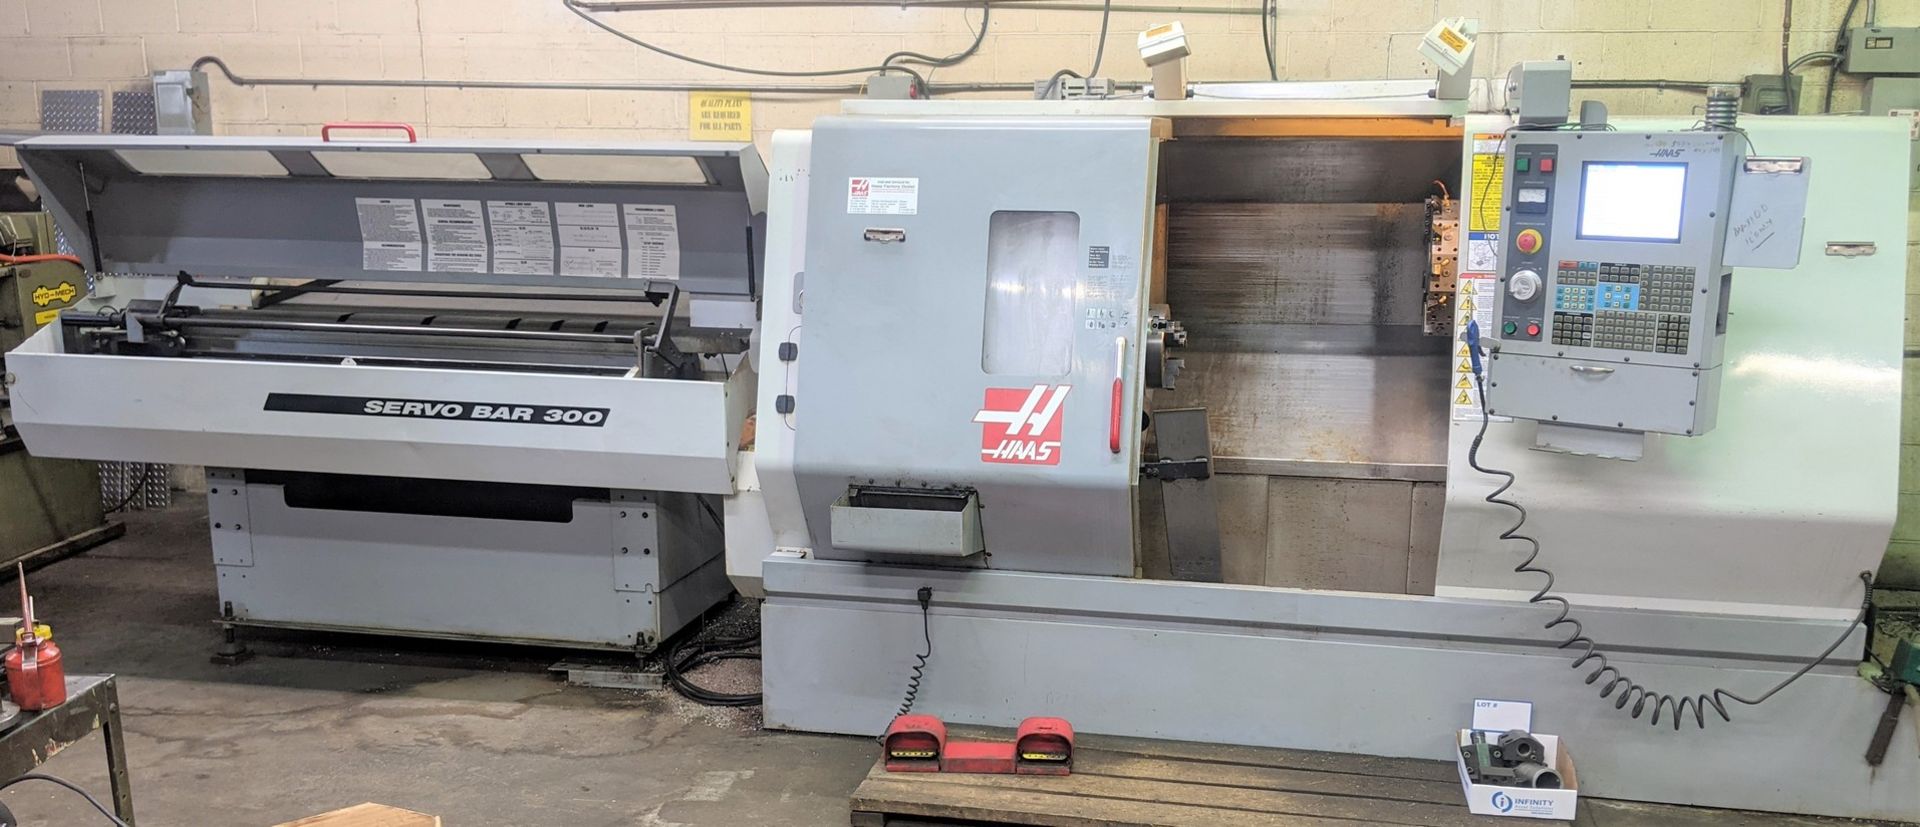 2005 HAAS SL-30T CNC LATHE, CNC CONTROL, 10” 3-JAW CHUCK, TAILSTOCK, TOOL PRESETTER, 12-STATION